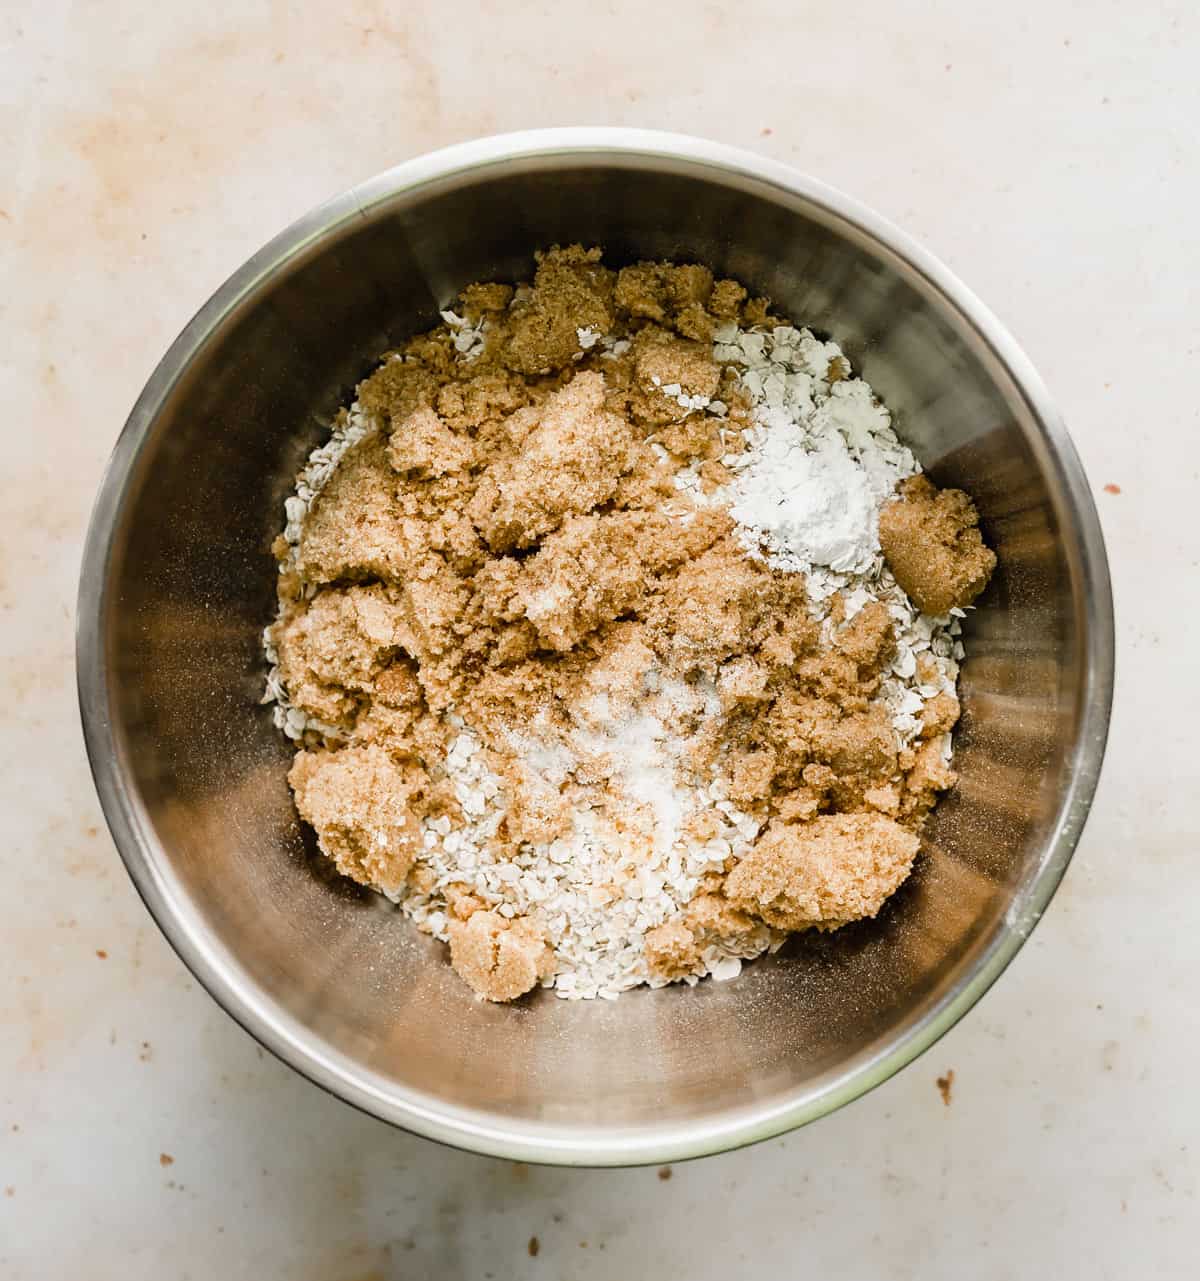 A metal bowl full of the dry ingredients used to make a baked oatmeal cake recipe.